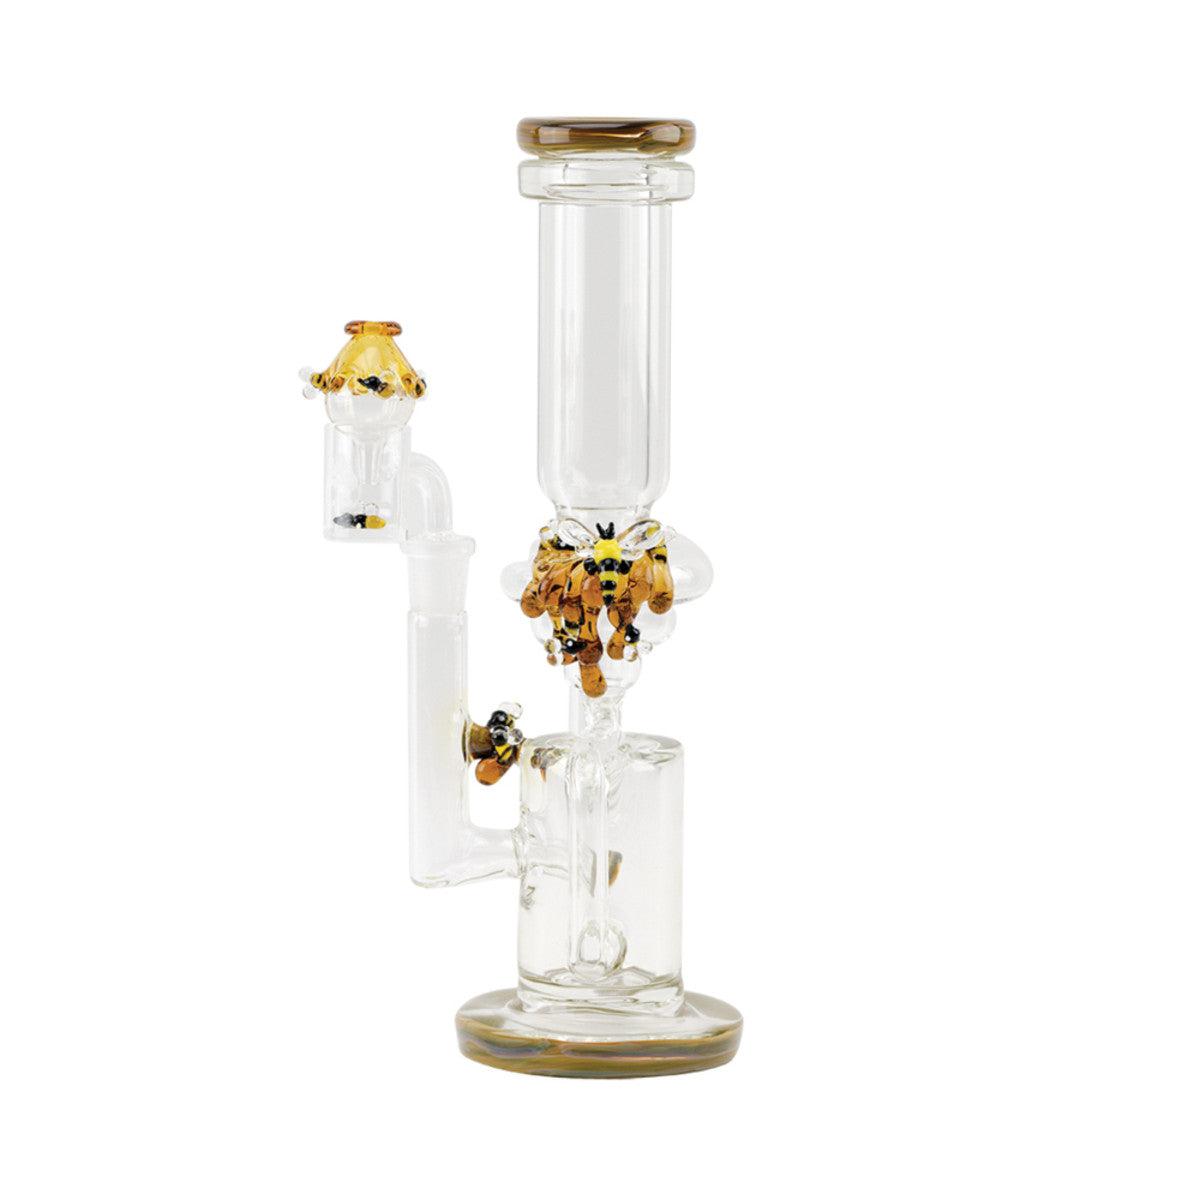 Empire Glassworks Recycler Rig - Save the Bees